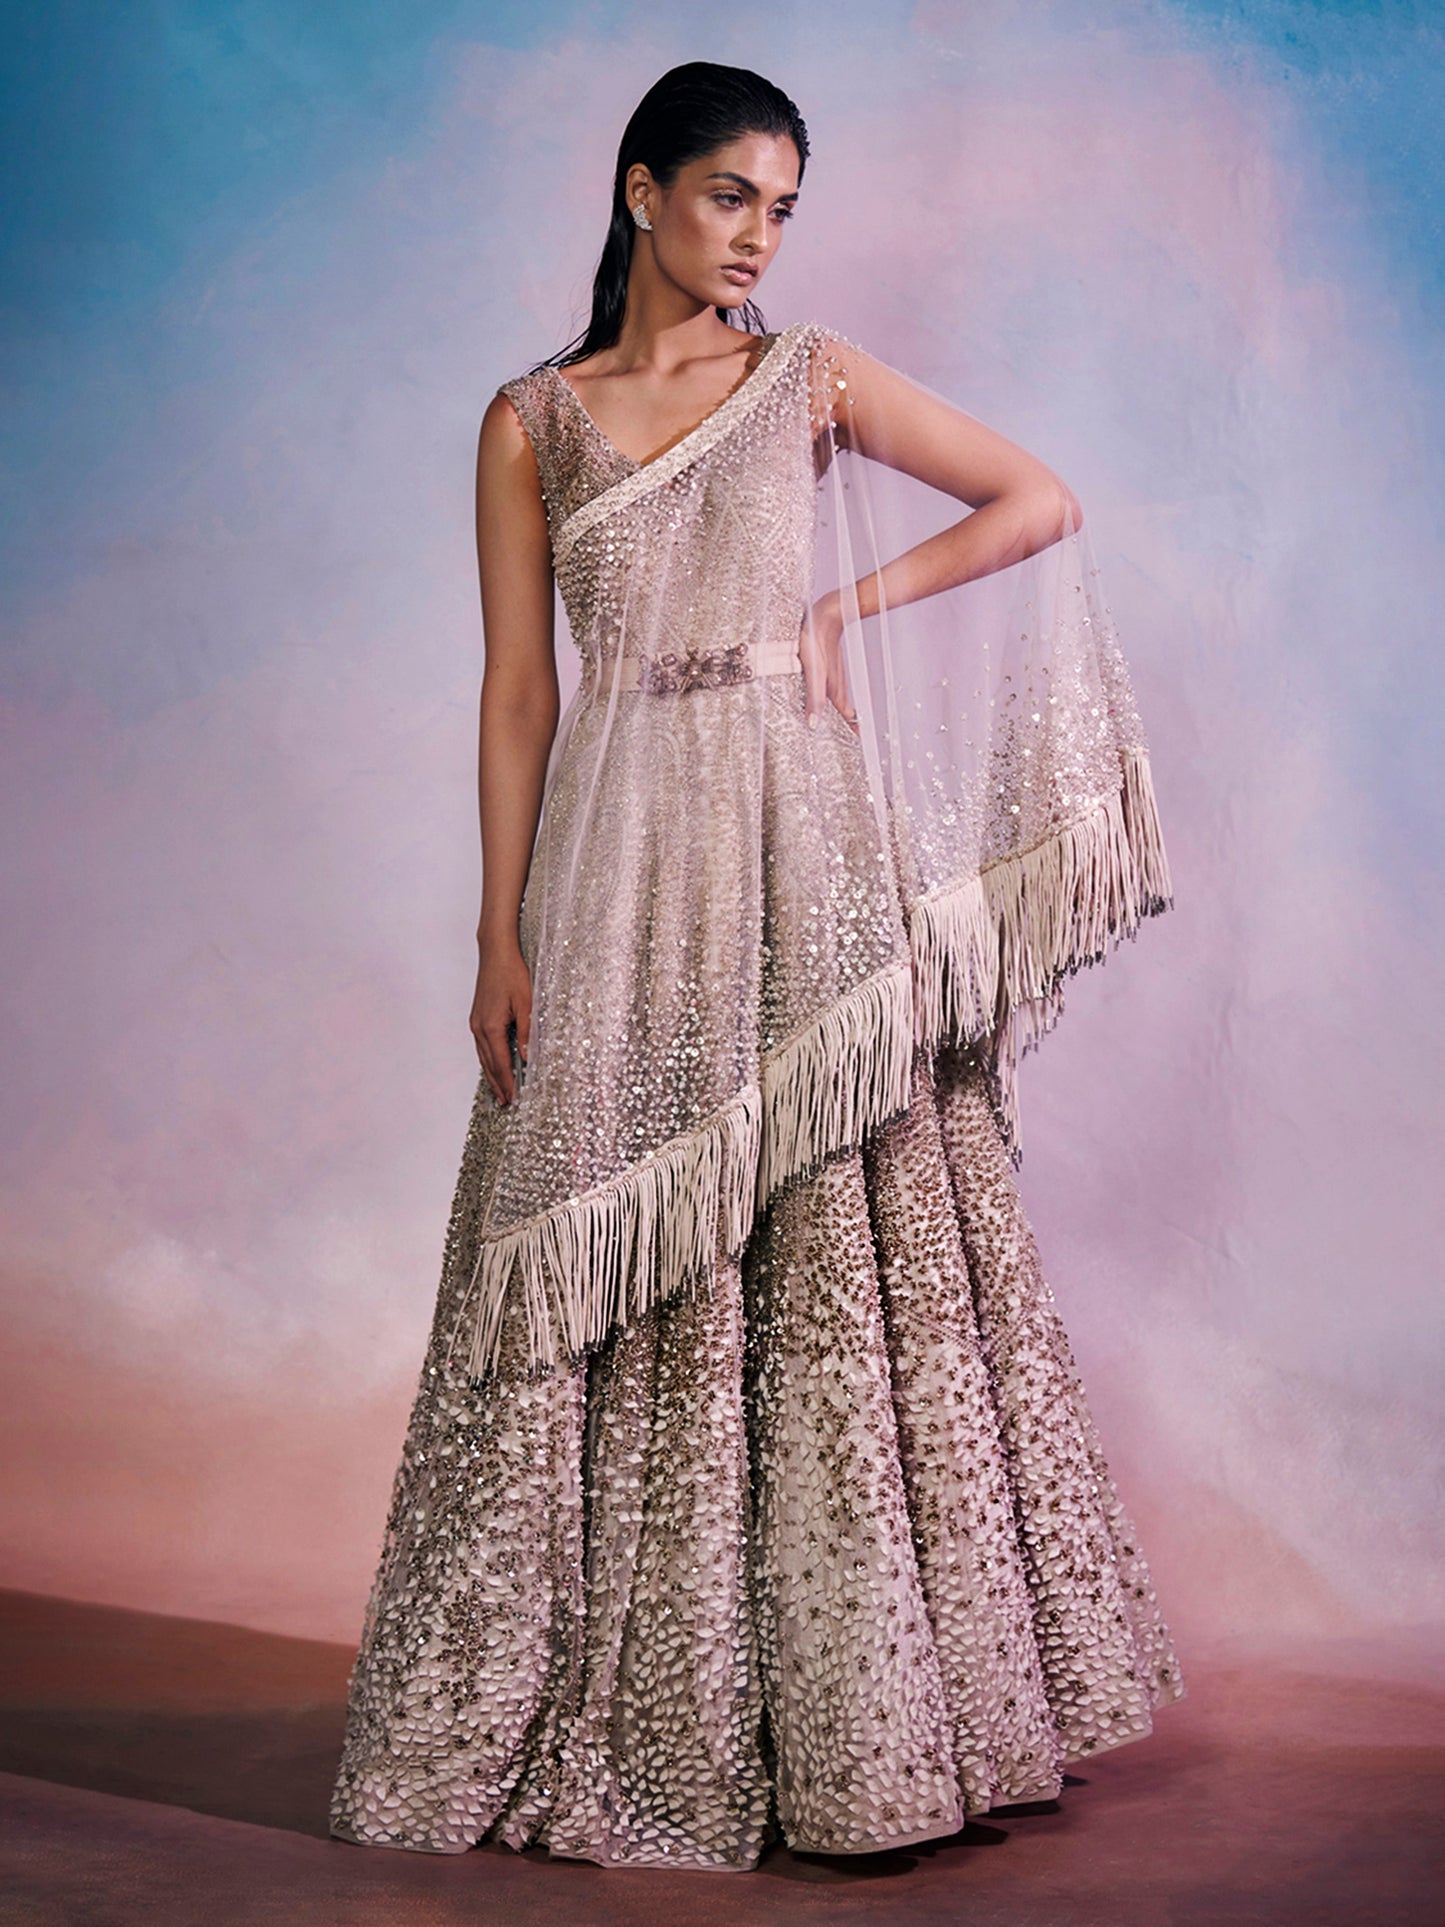 The Meadow Gown With Tasseled Cape